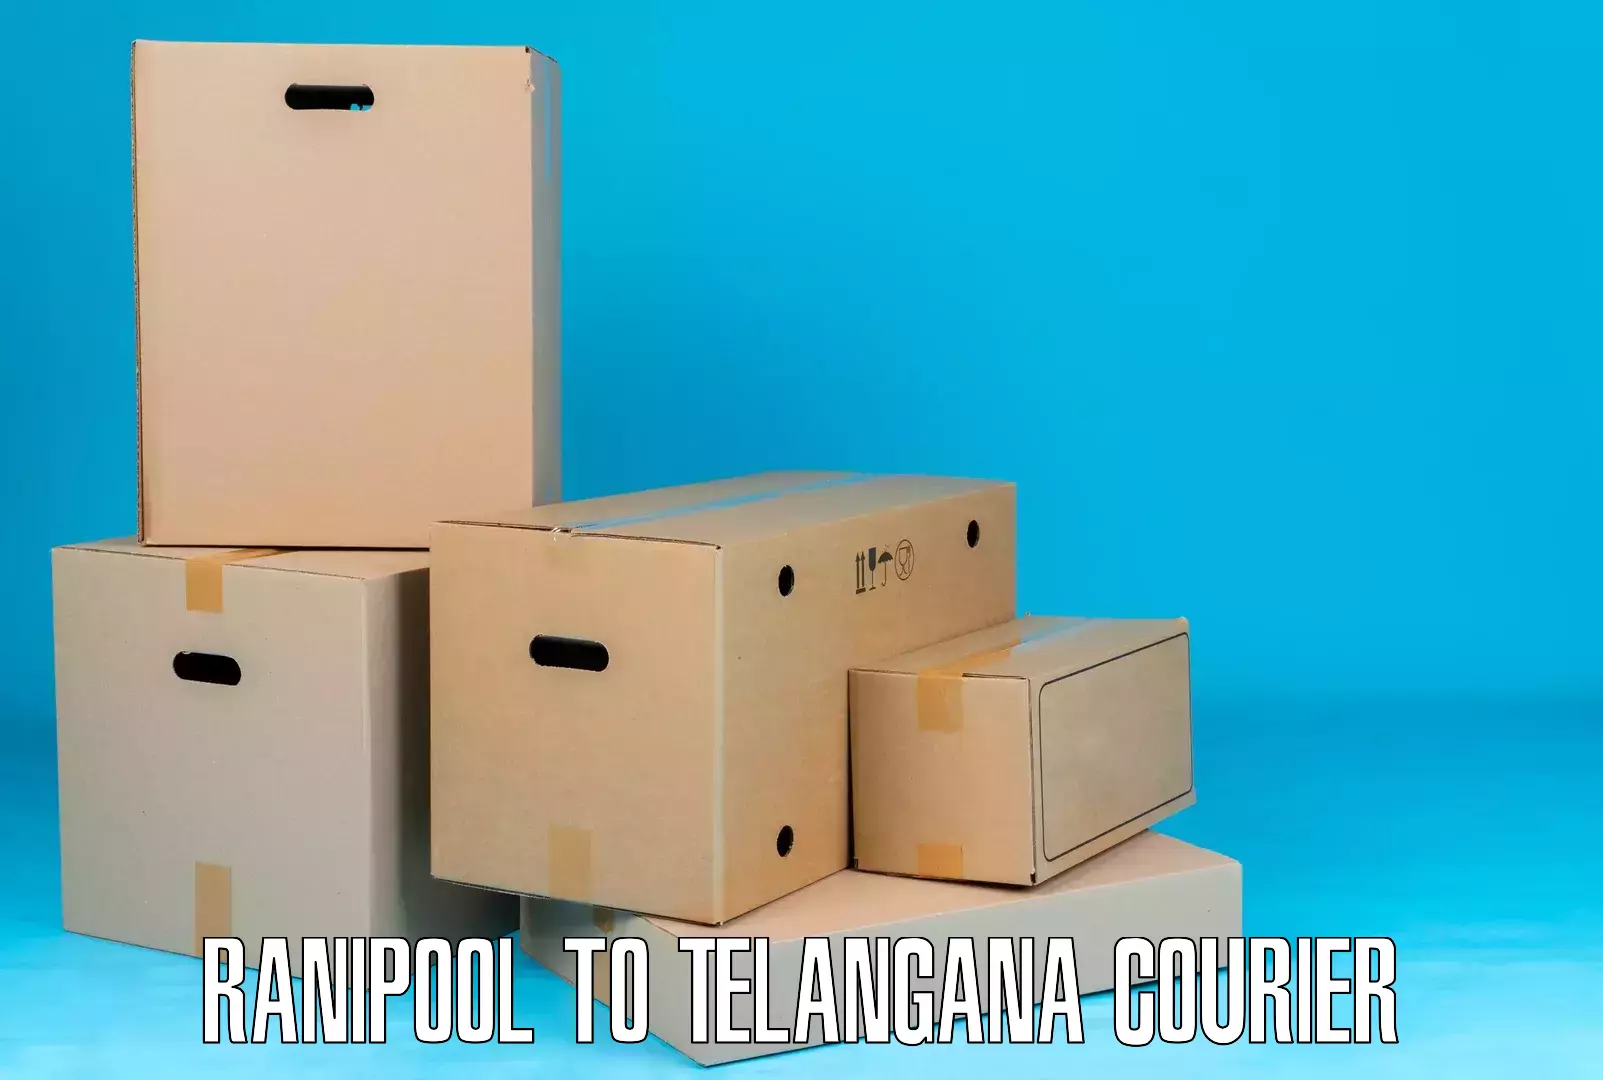 Dynamic courier operations Ranipool to Odela